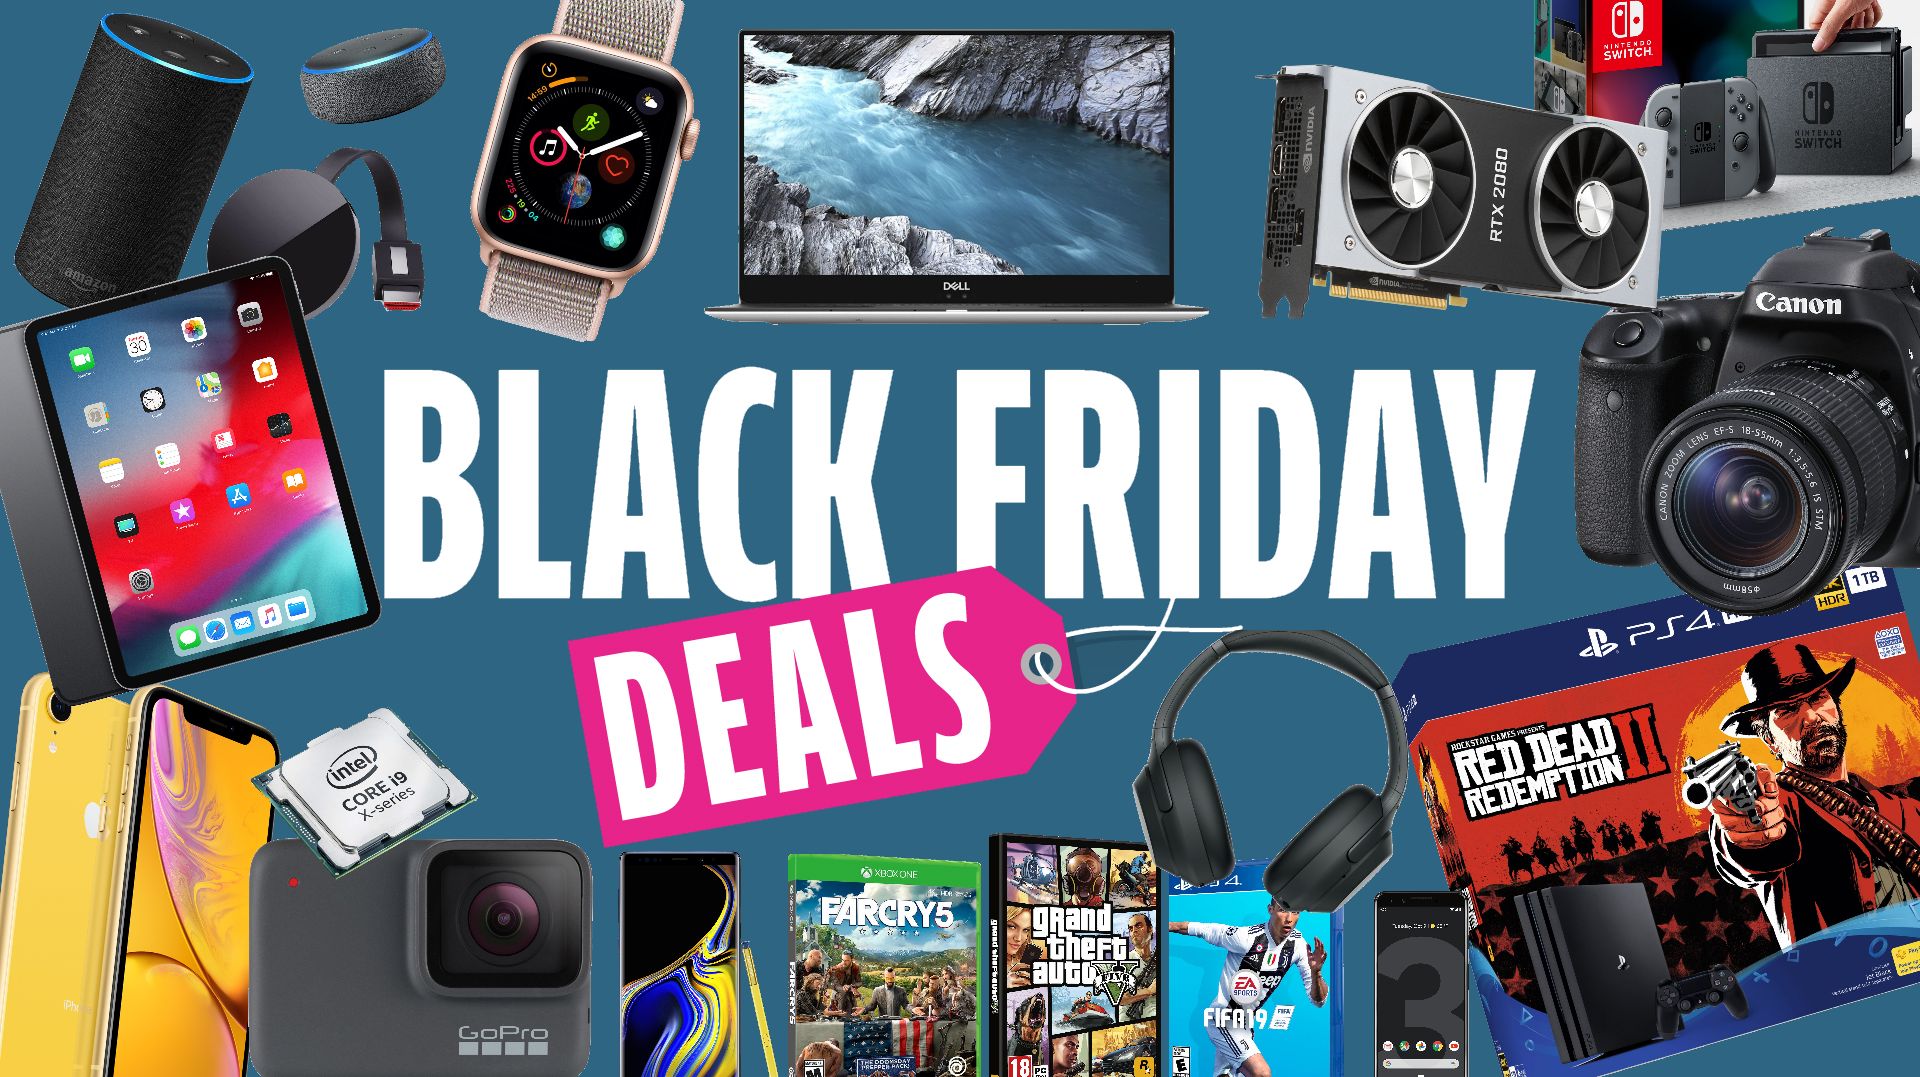 Best Black Friday 2020 deals discount on gadgets under - What Time Can You Buy Black Friday Deals Online